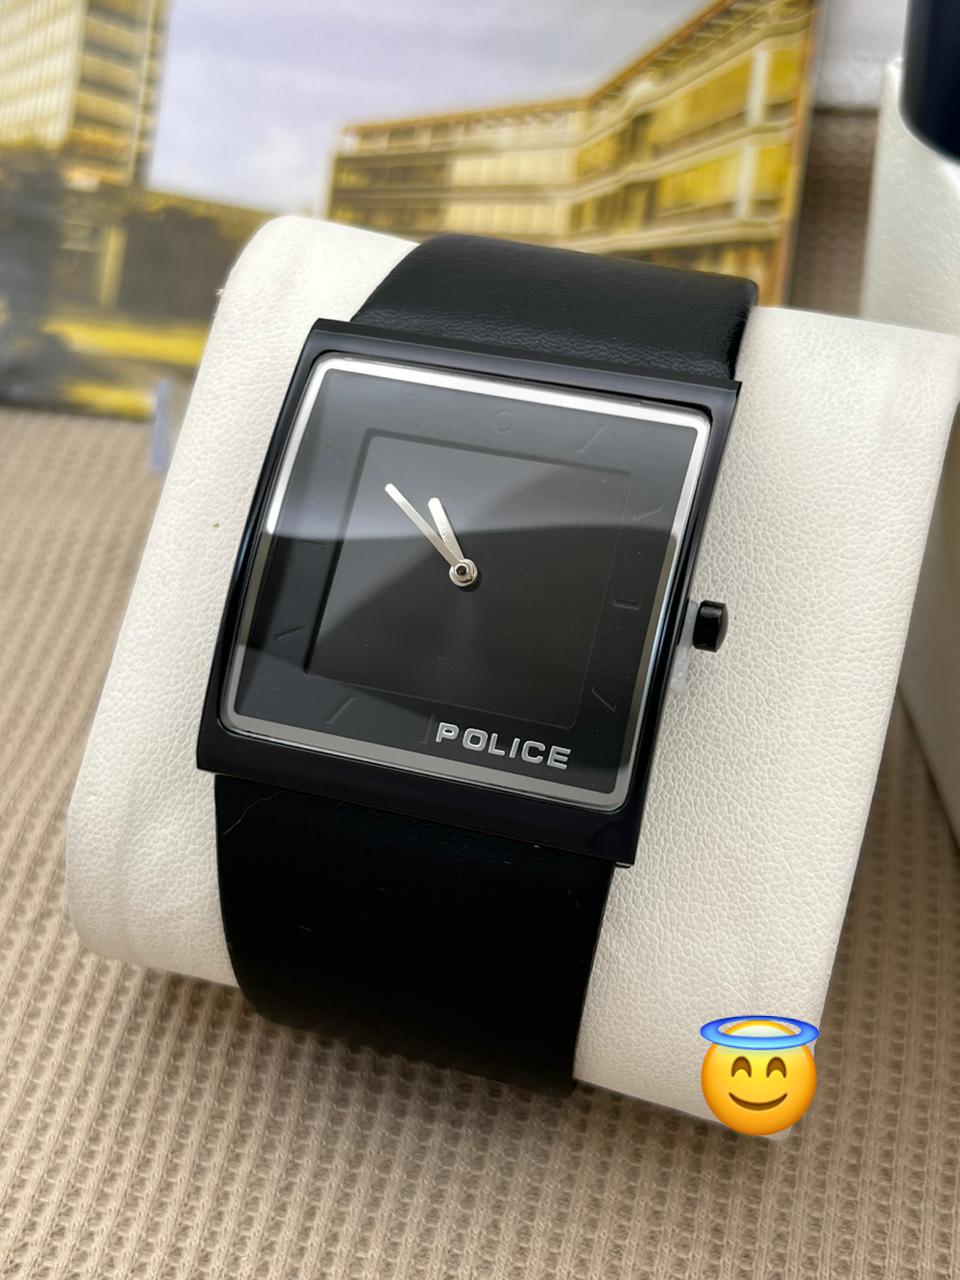 Police mens Watch